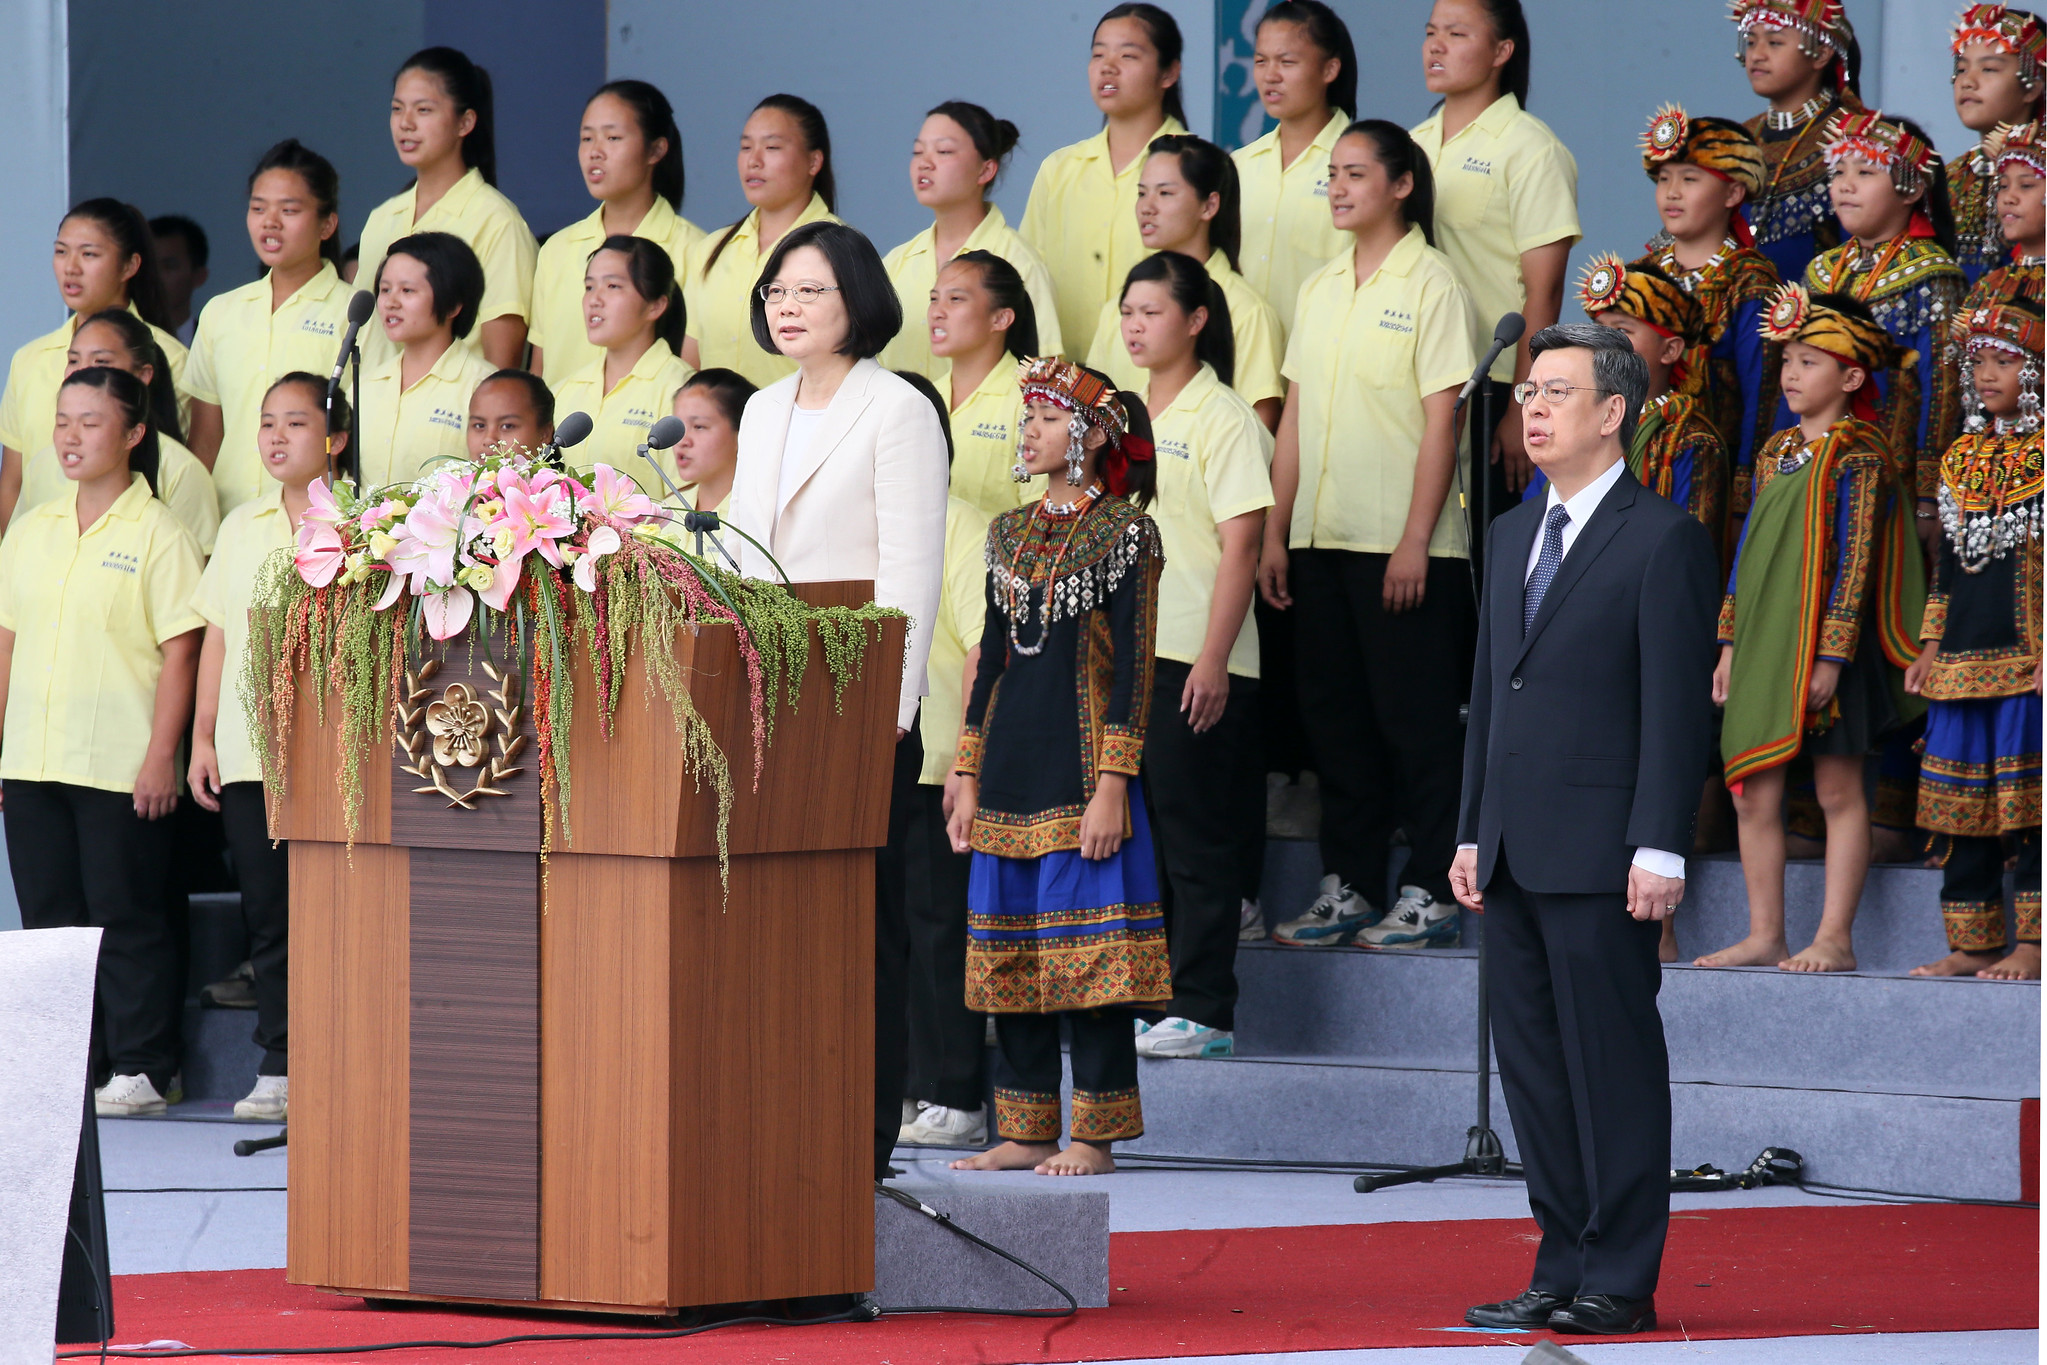 Taiwan’s 14th-term President Tsai Ing-wen and Vice President Chen Chien-jen attend the inaugural ceremony activities in 2016. © Office of the President, Republic of China (Taiwan) / Flickr